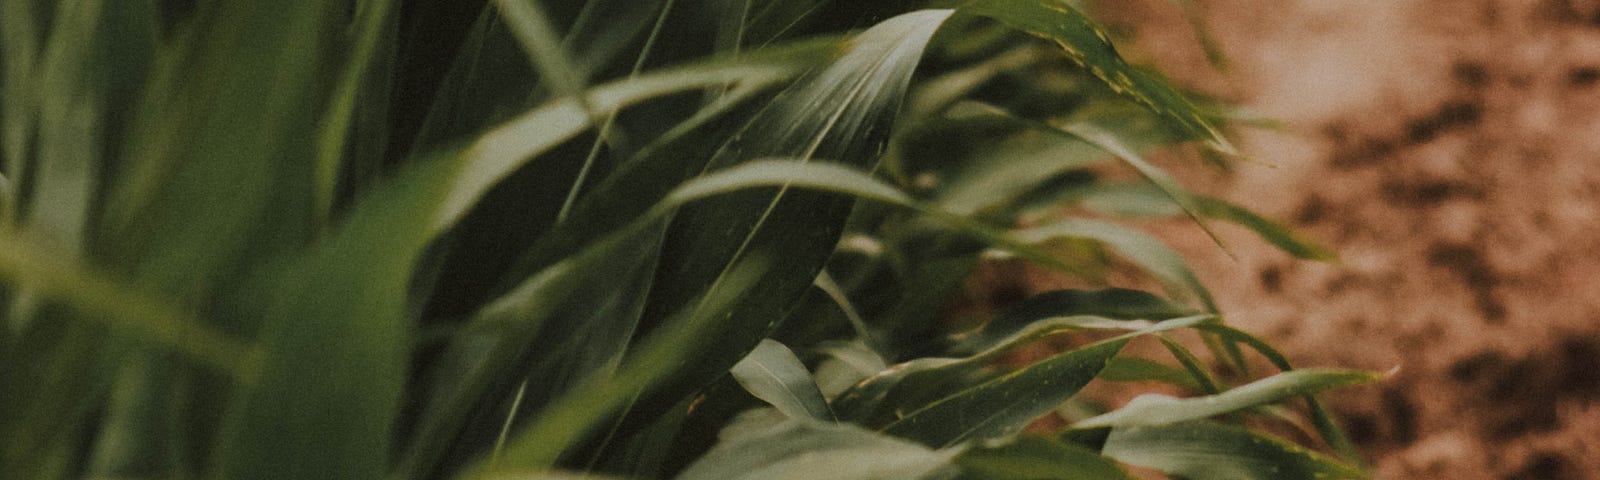 Leaves from a maize crop growing next to a dirt path